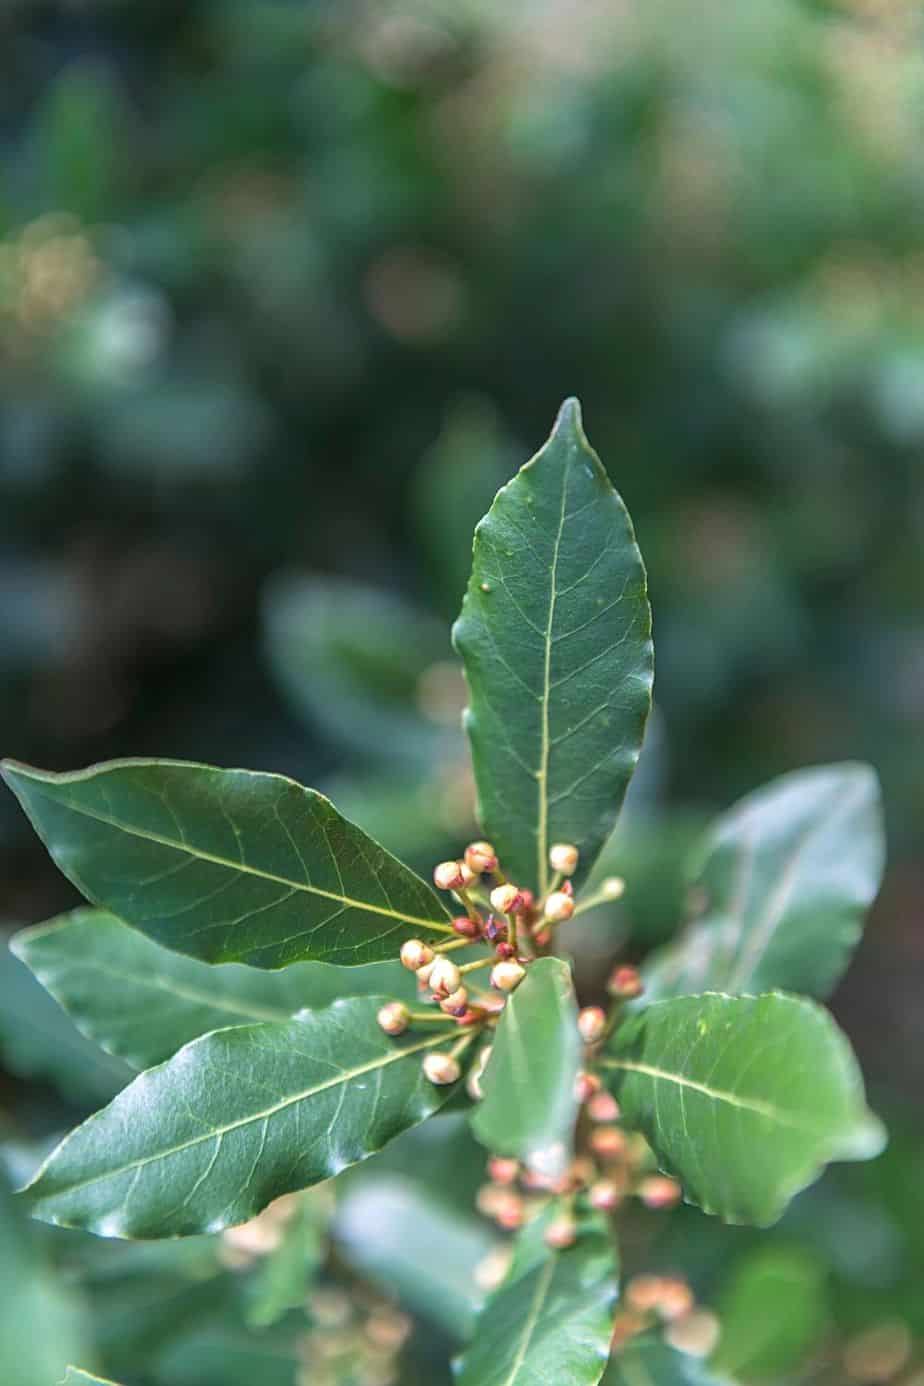 Bay Laurel, despite being beneficial to humans, is toxic to your cats